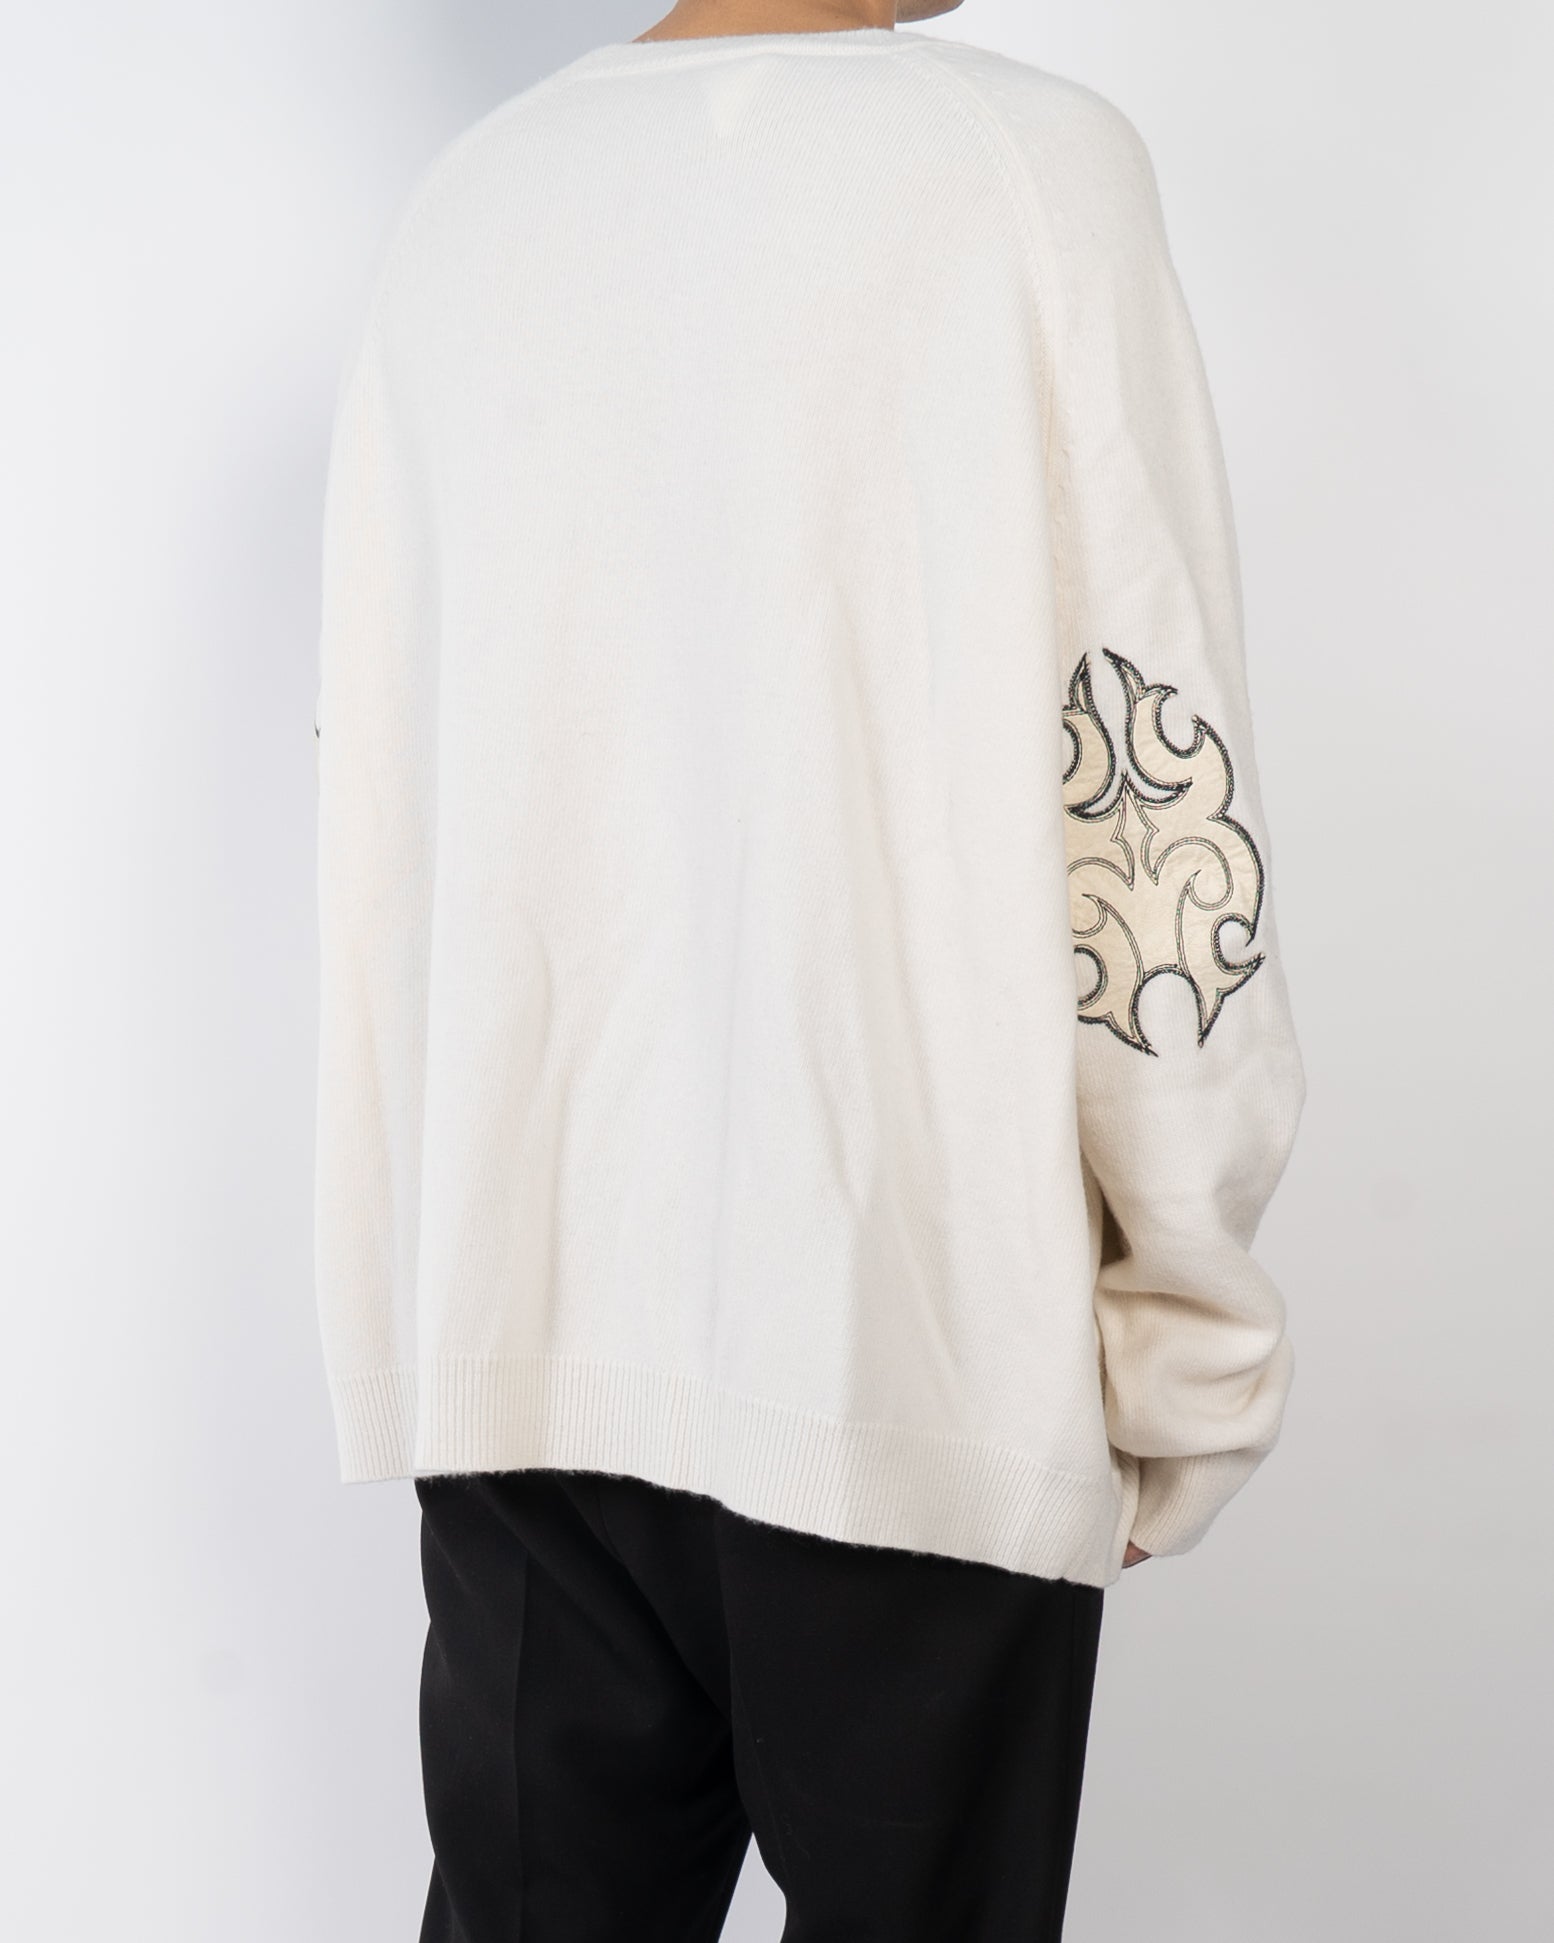 FW17 Oversized Tribal Patch Sweater